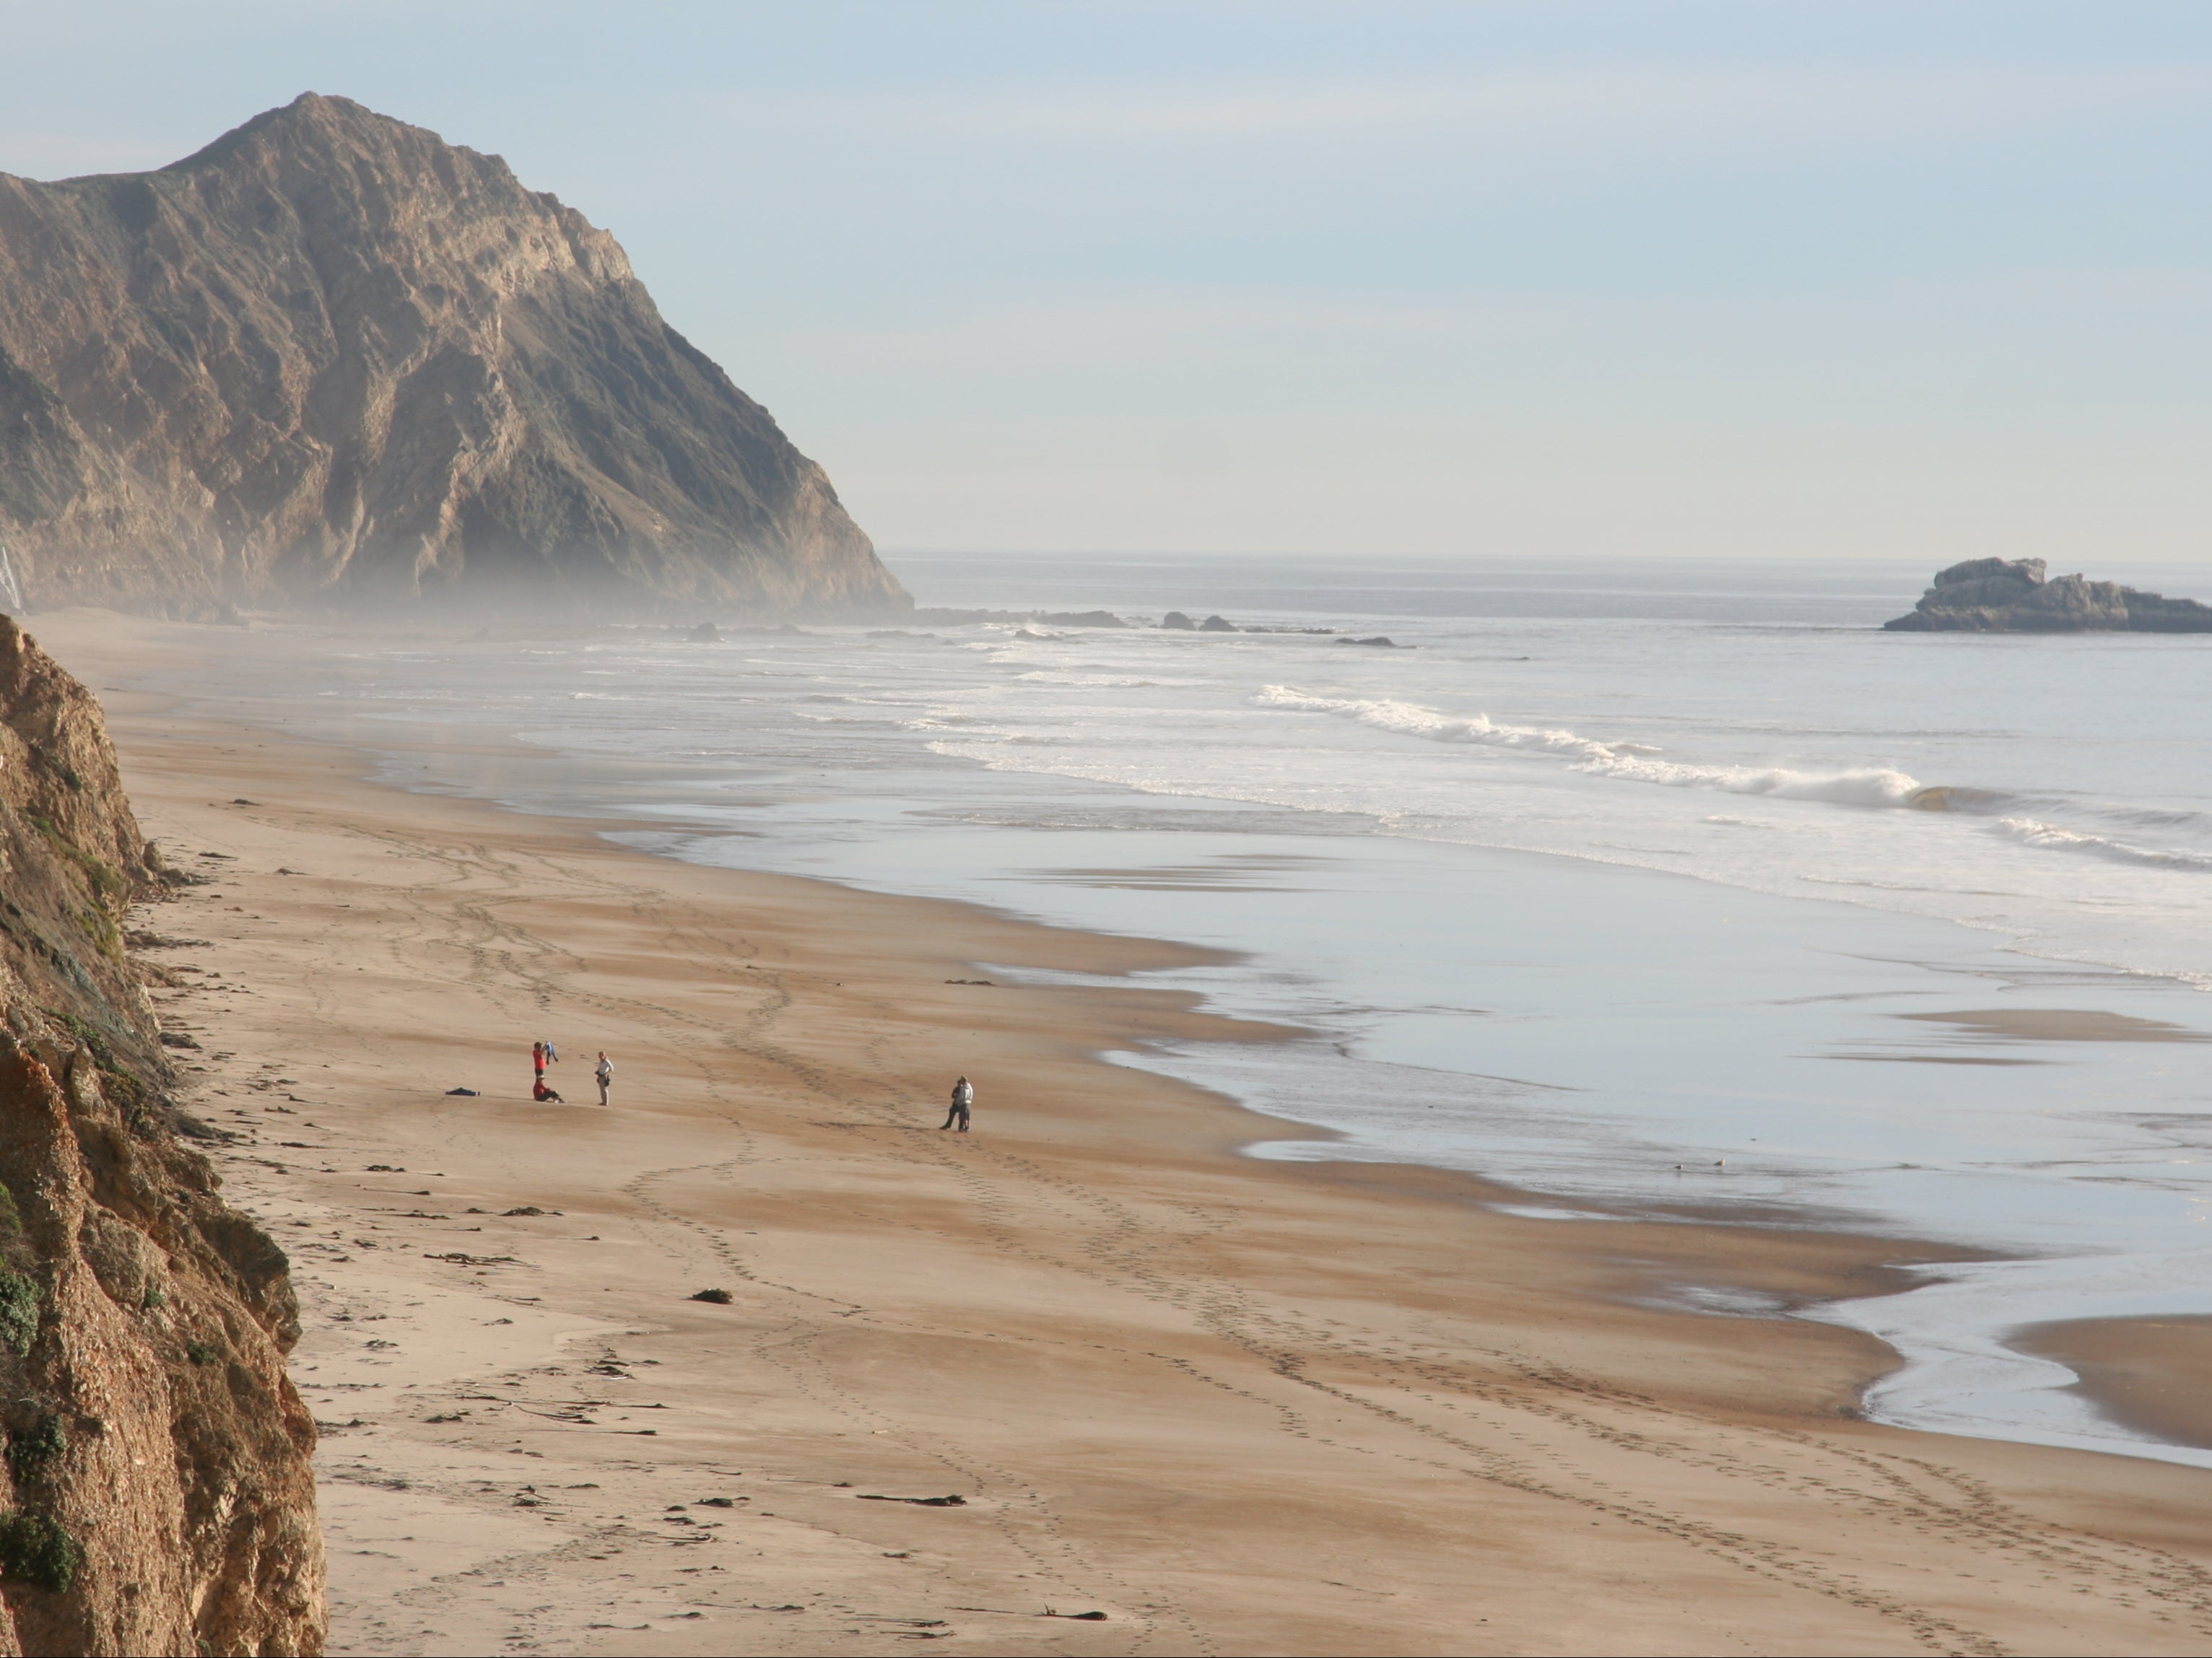 It’s a five-mile hike to this remote California beach